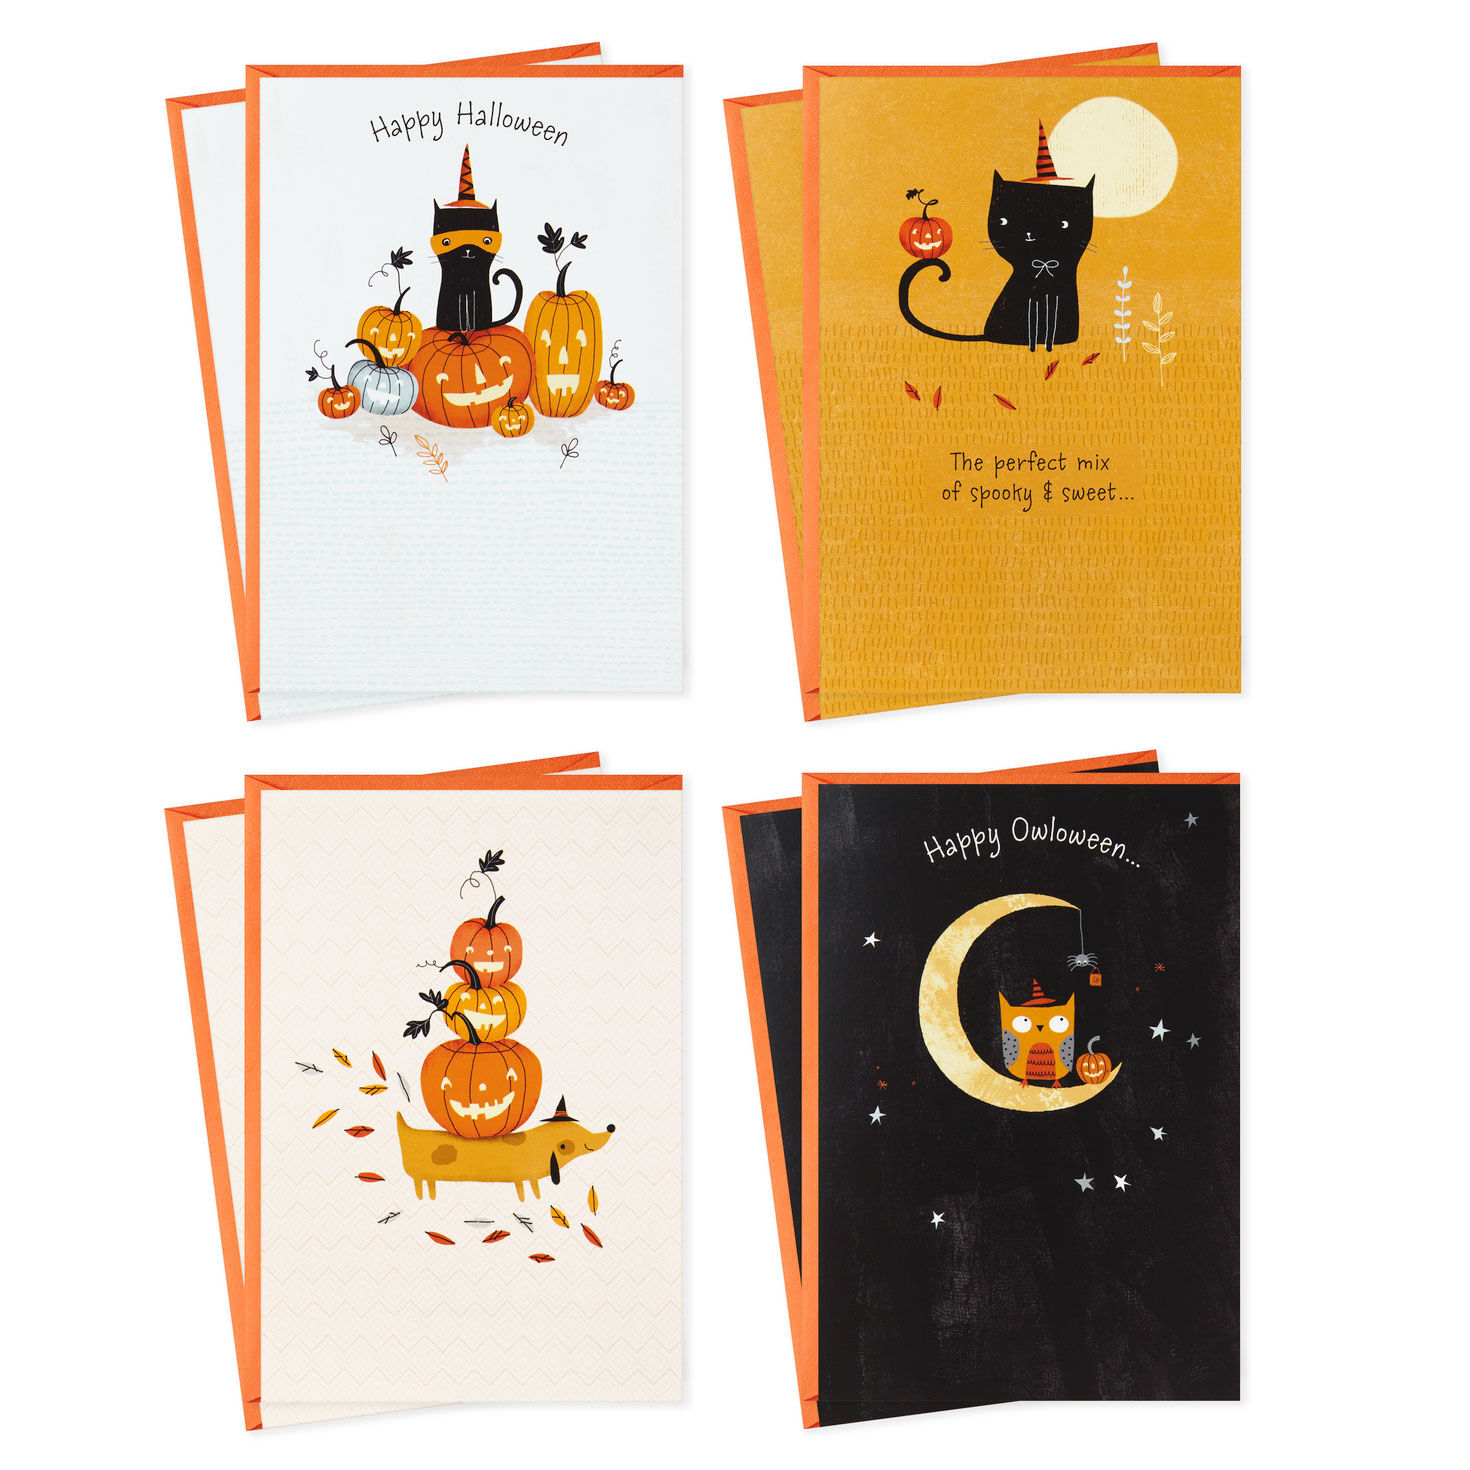 Candy Corn 8 Cards with Envelopes Hallmark Halloween Cards Assortment 